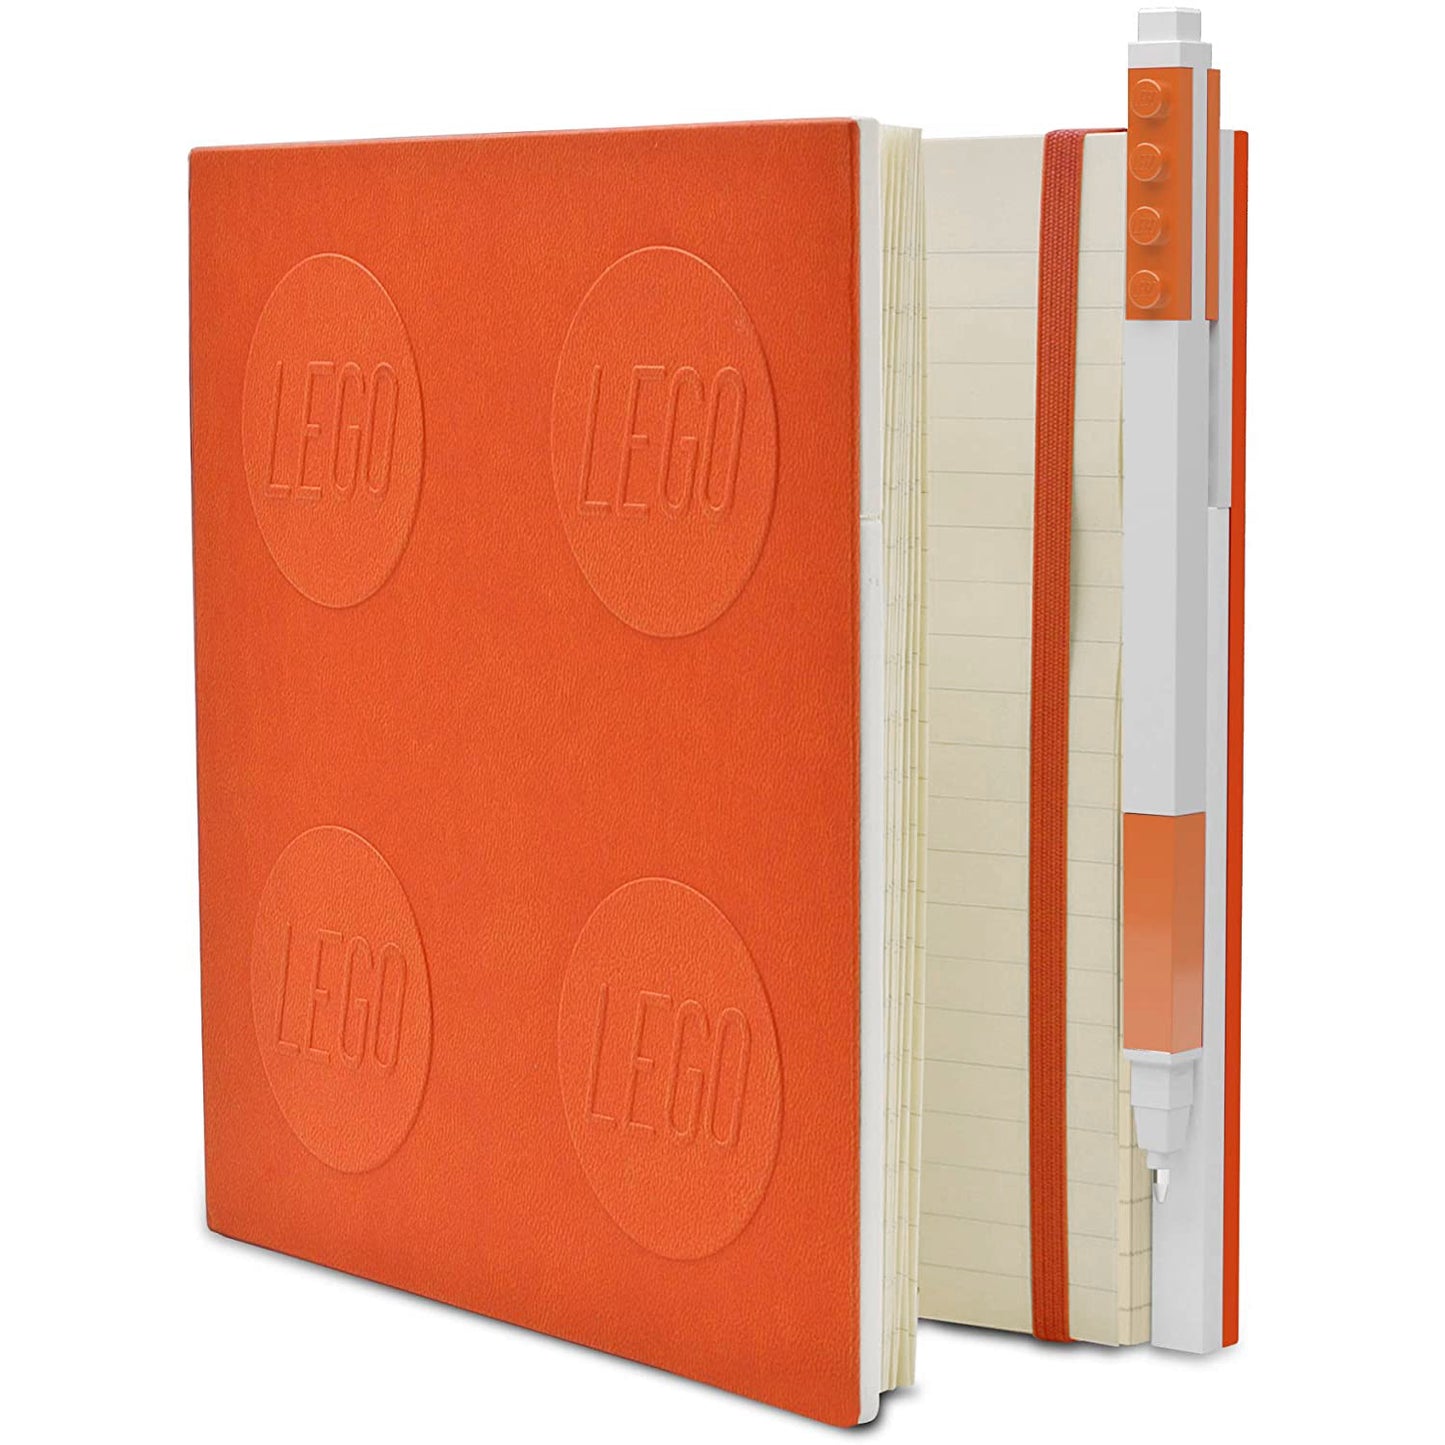 IQ LEGO® 2.0 Stationery Locking Notebook with Color-Matched Gel Pen - Orange (52440)